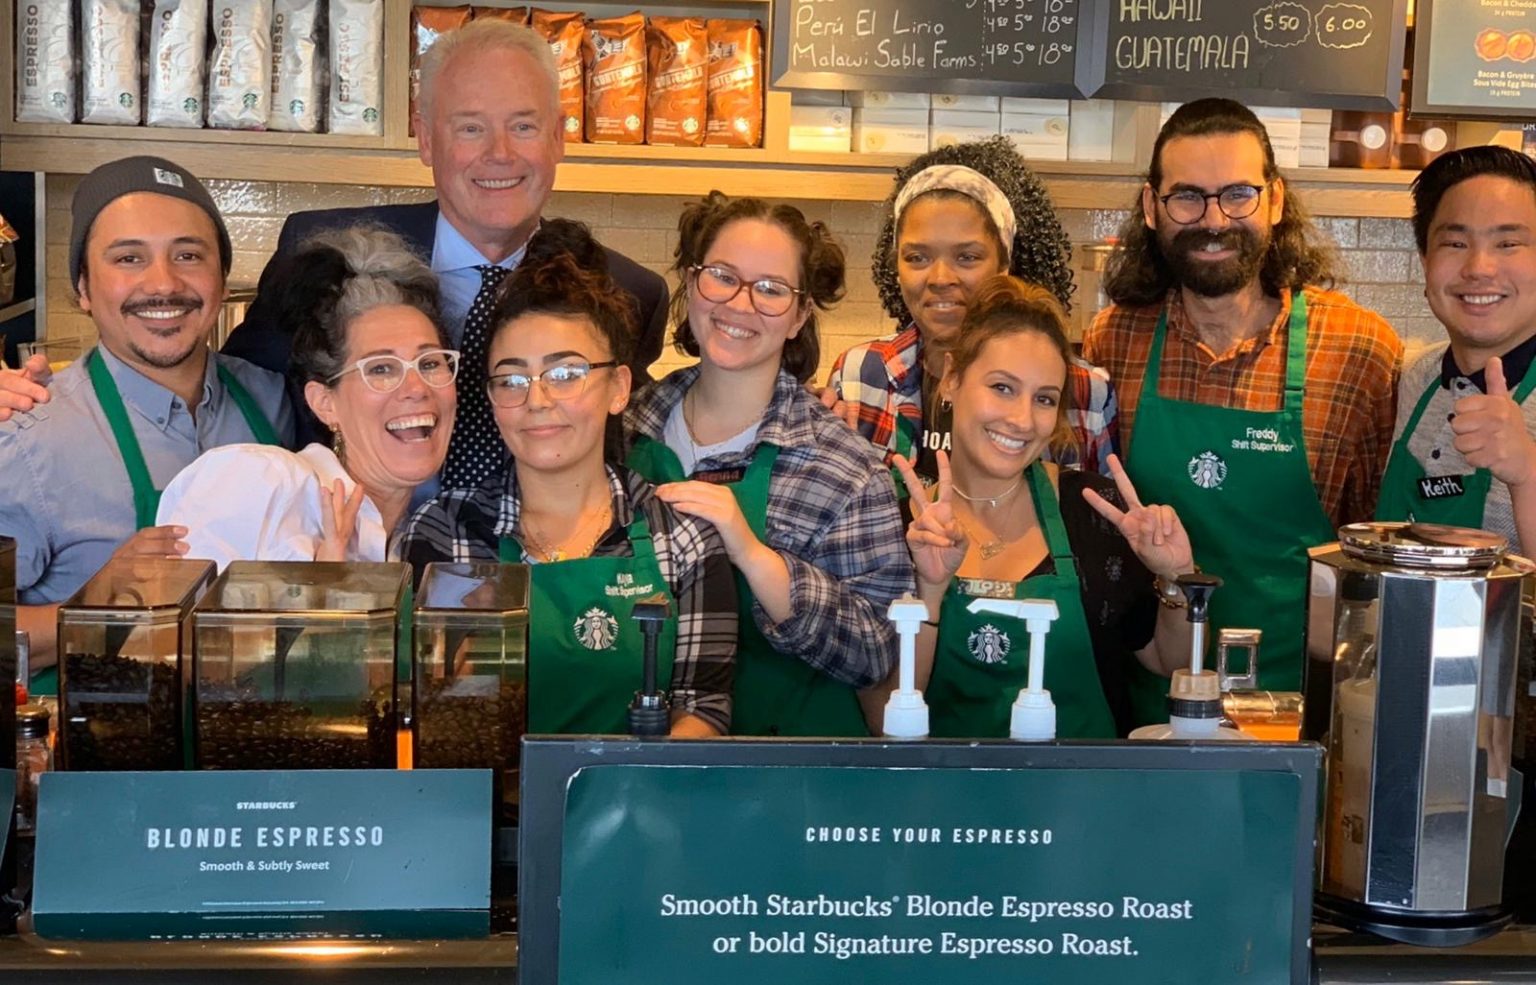 U.S. Starbucks employees can now get up to 20 free therapy sessions RALI